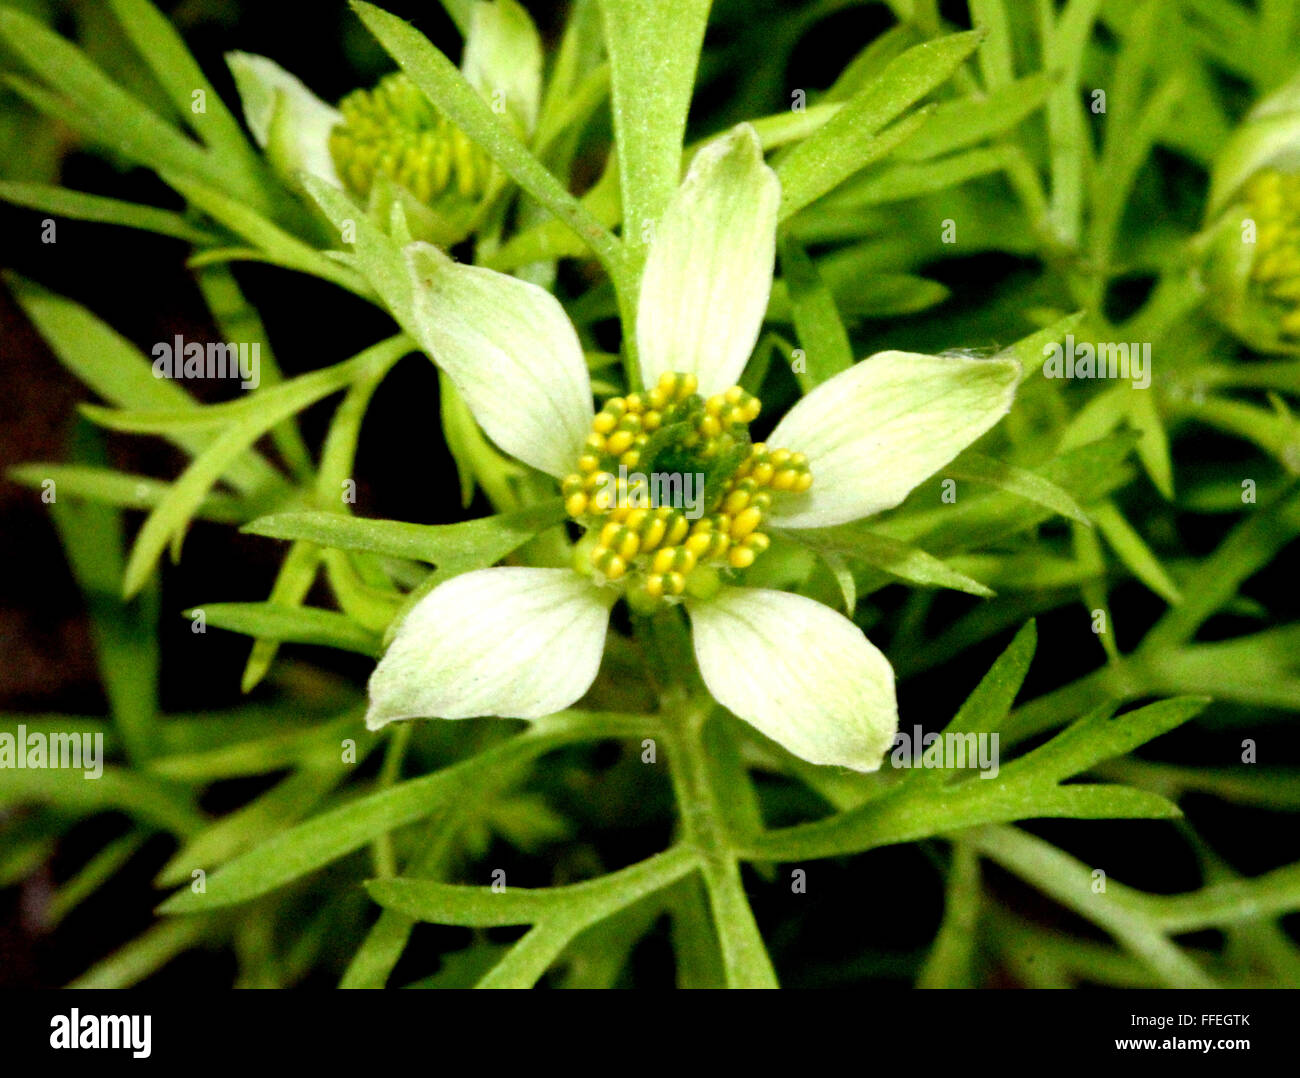 Nigella sativa, black caraway, cultivated annual herb with finely divided leaves and pale white flowers, capsule, black seeds Stock Photo